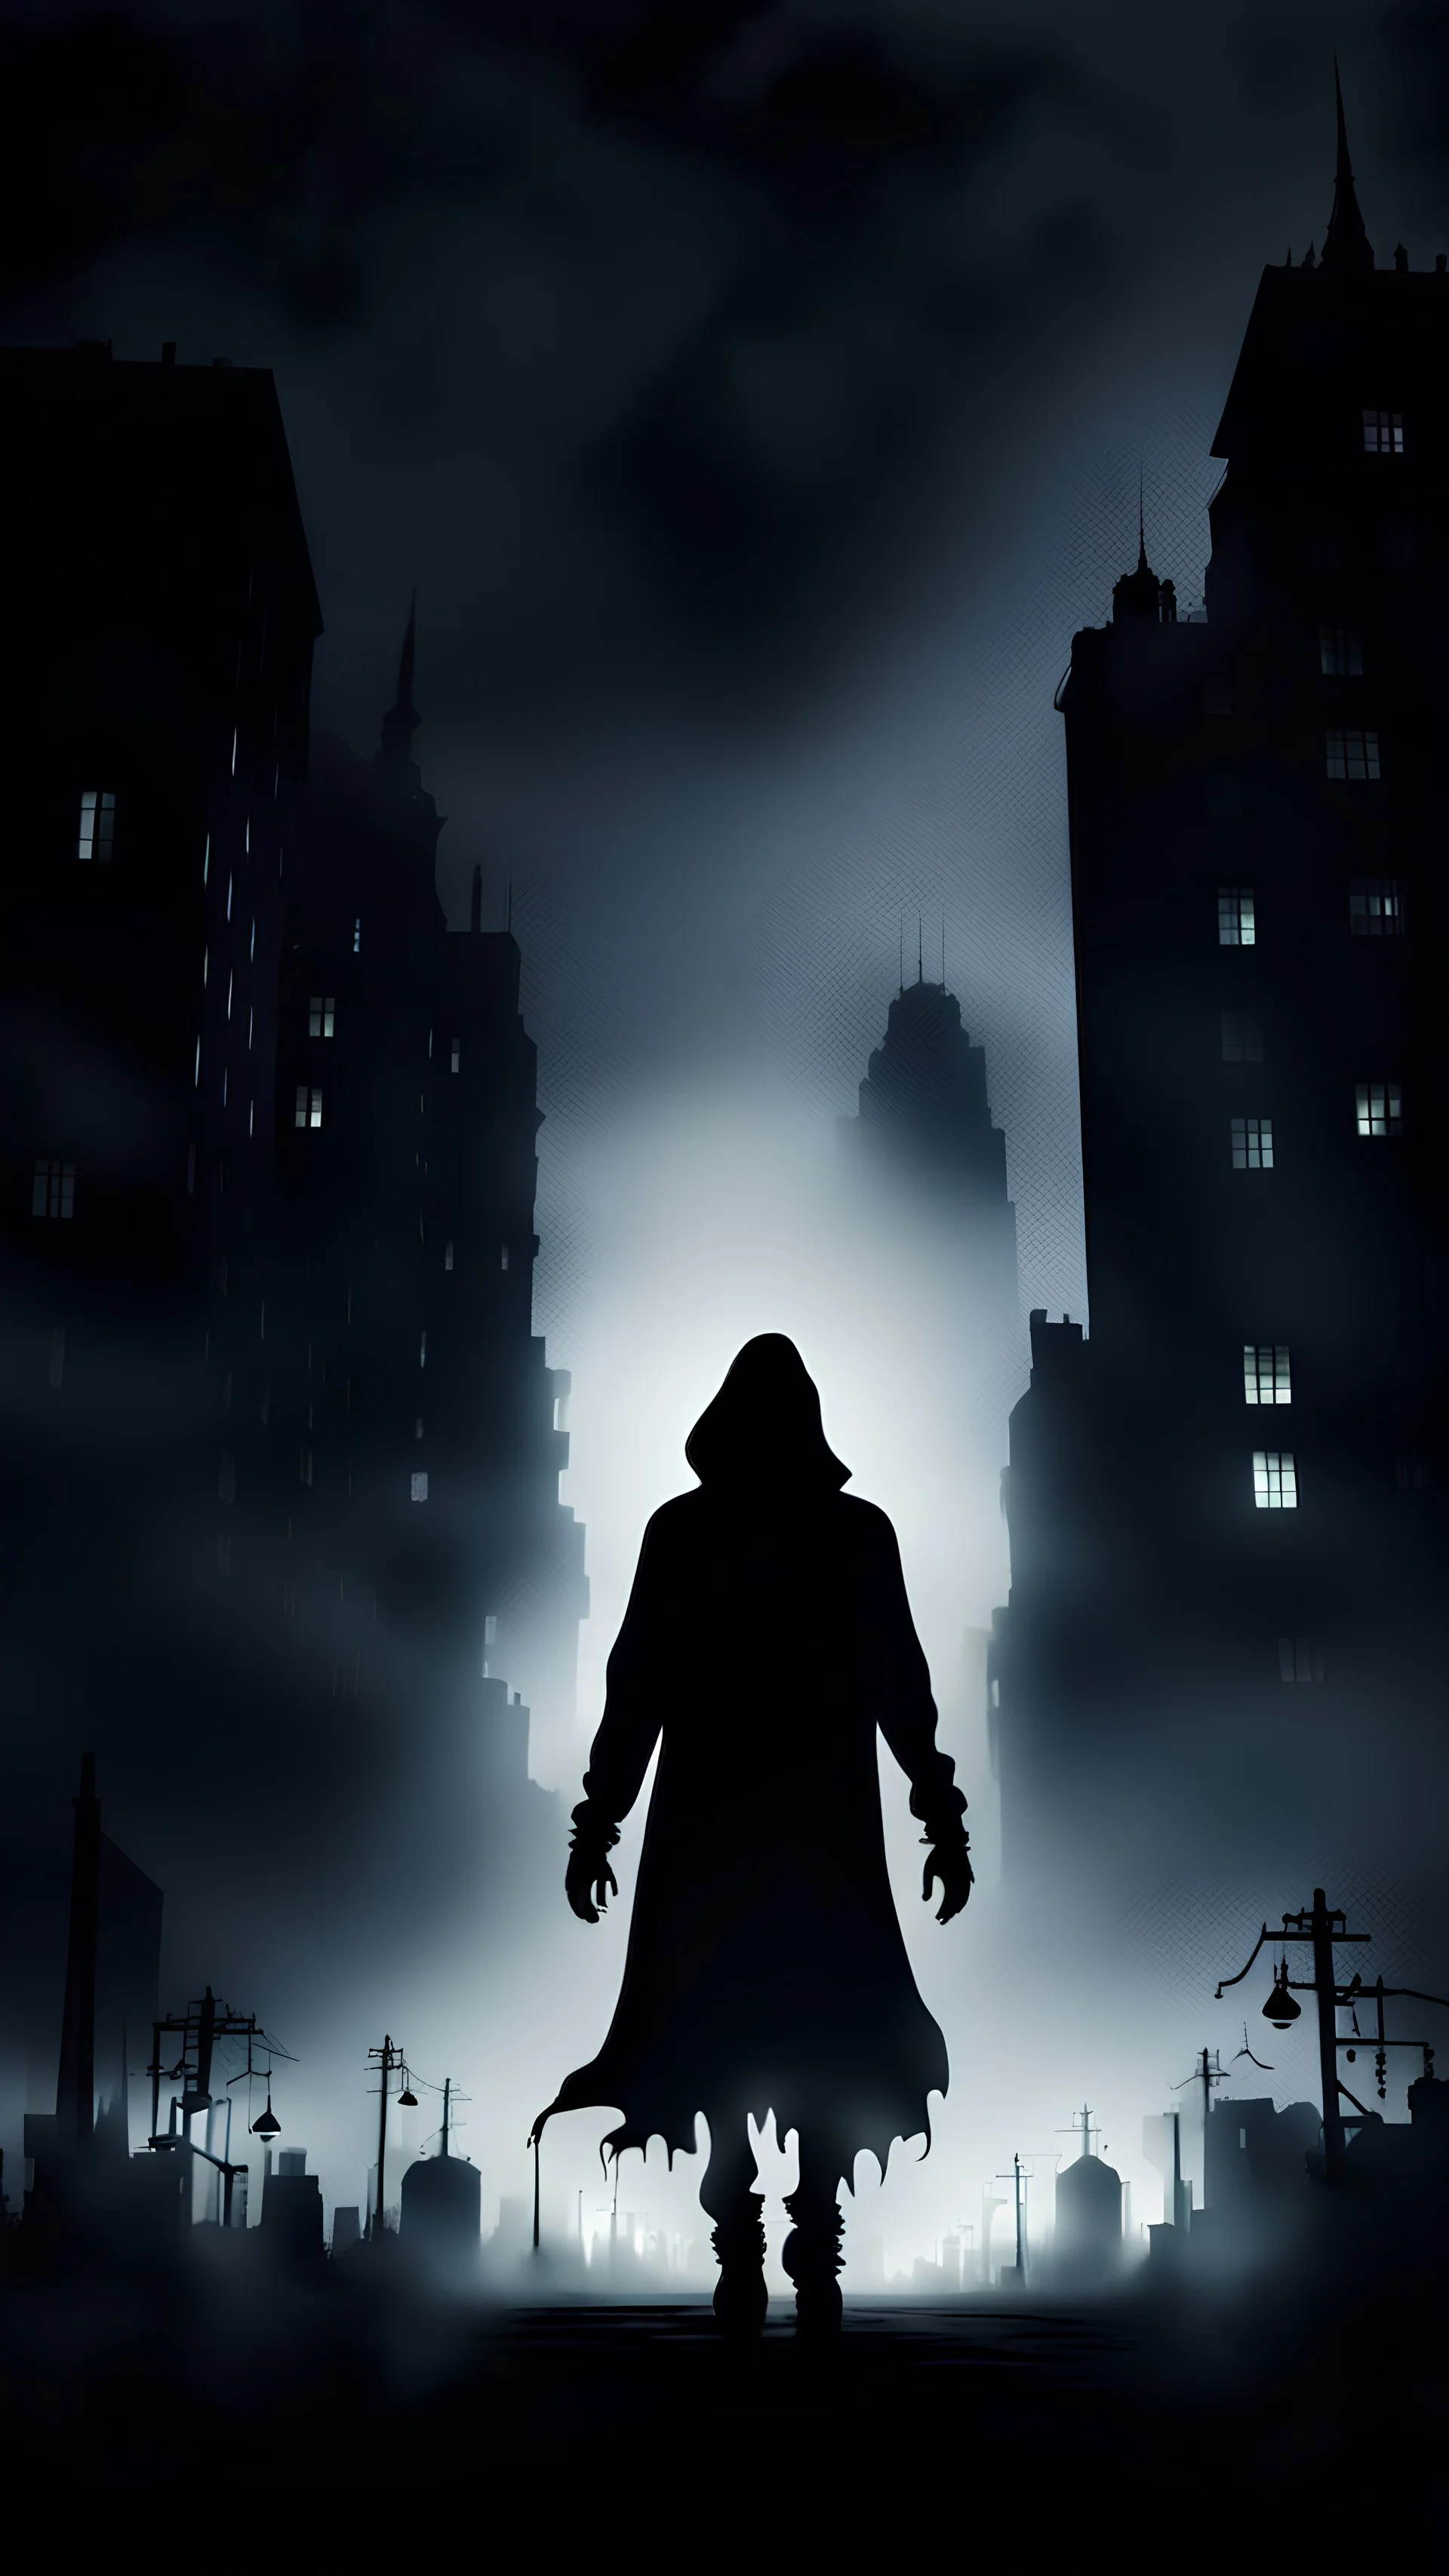 scary black silhouette in black haze in the air against the backdrop of night buildings in the style of a horror film, eerie atmosphere